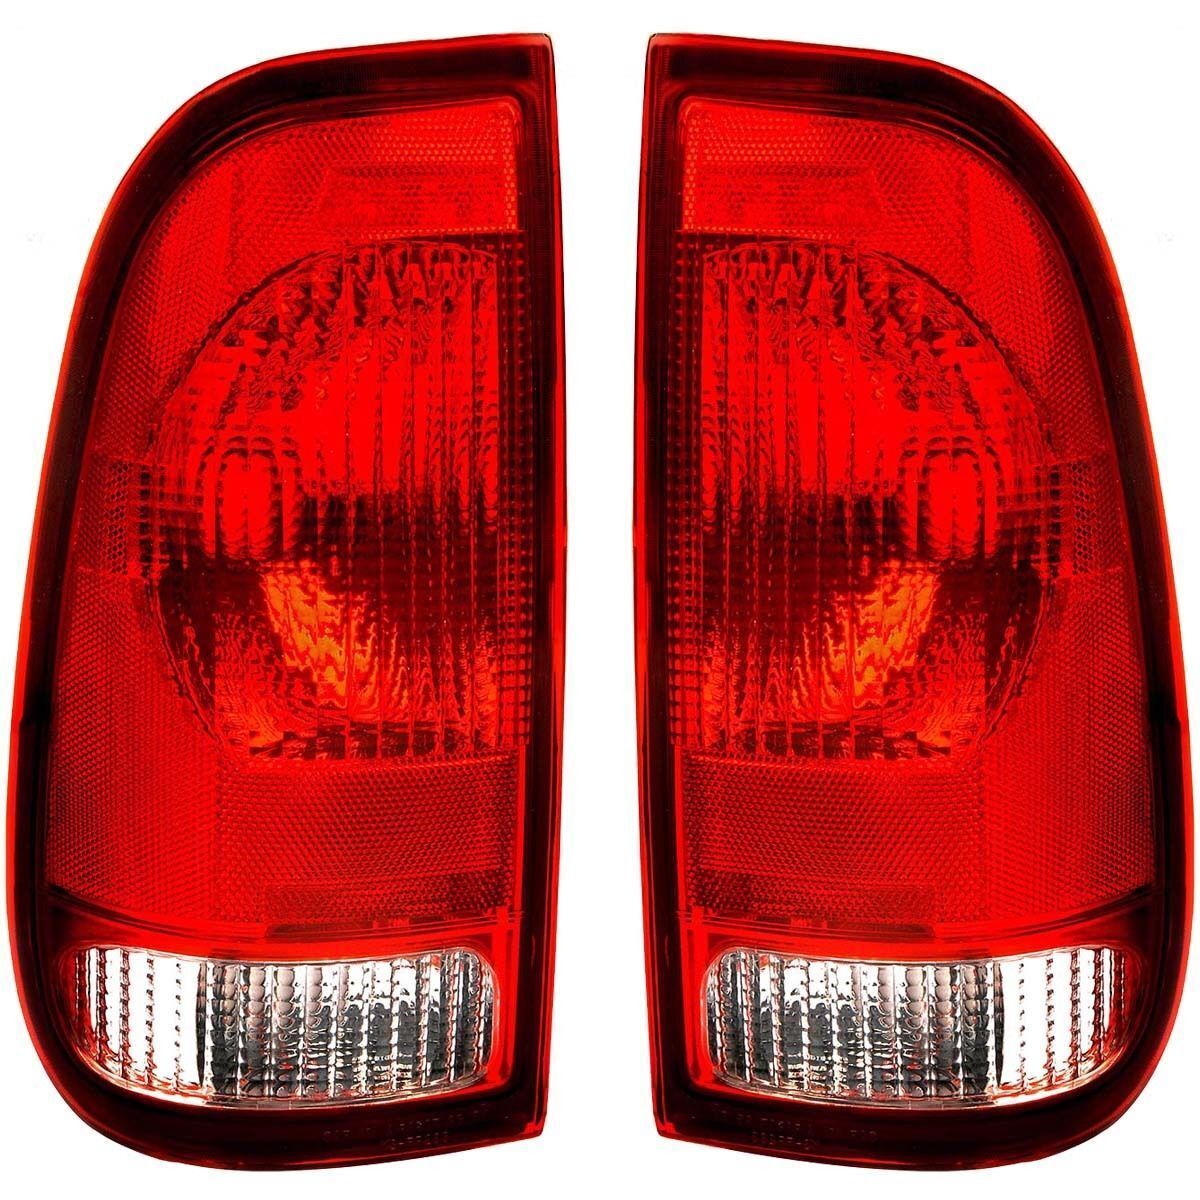 PAIR Tail Lights Left and Right Side Fits Fits Ford F-Series StylesideBrand New